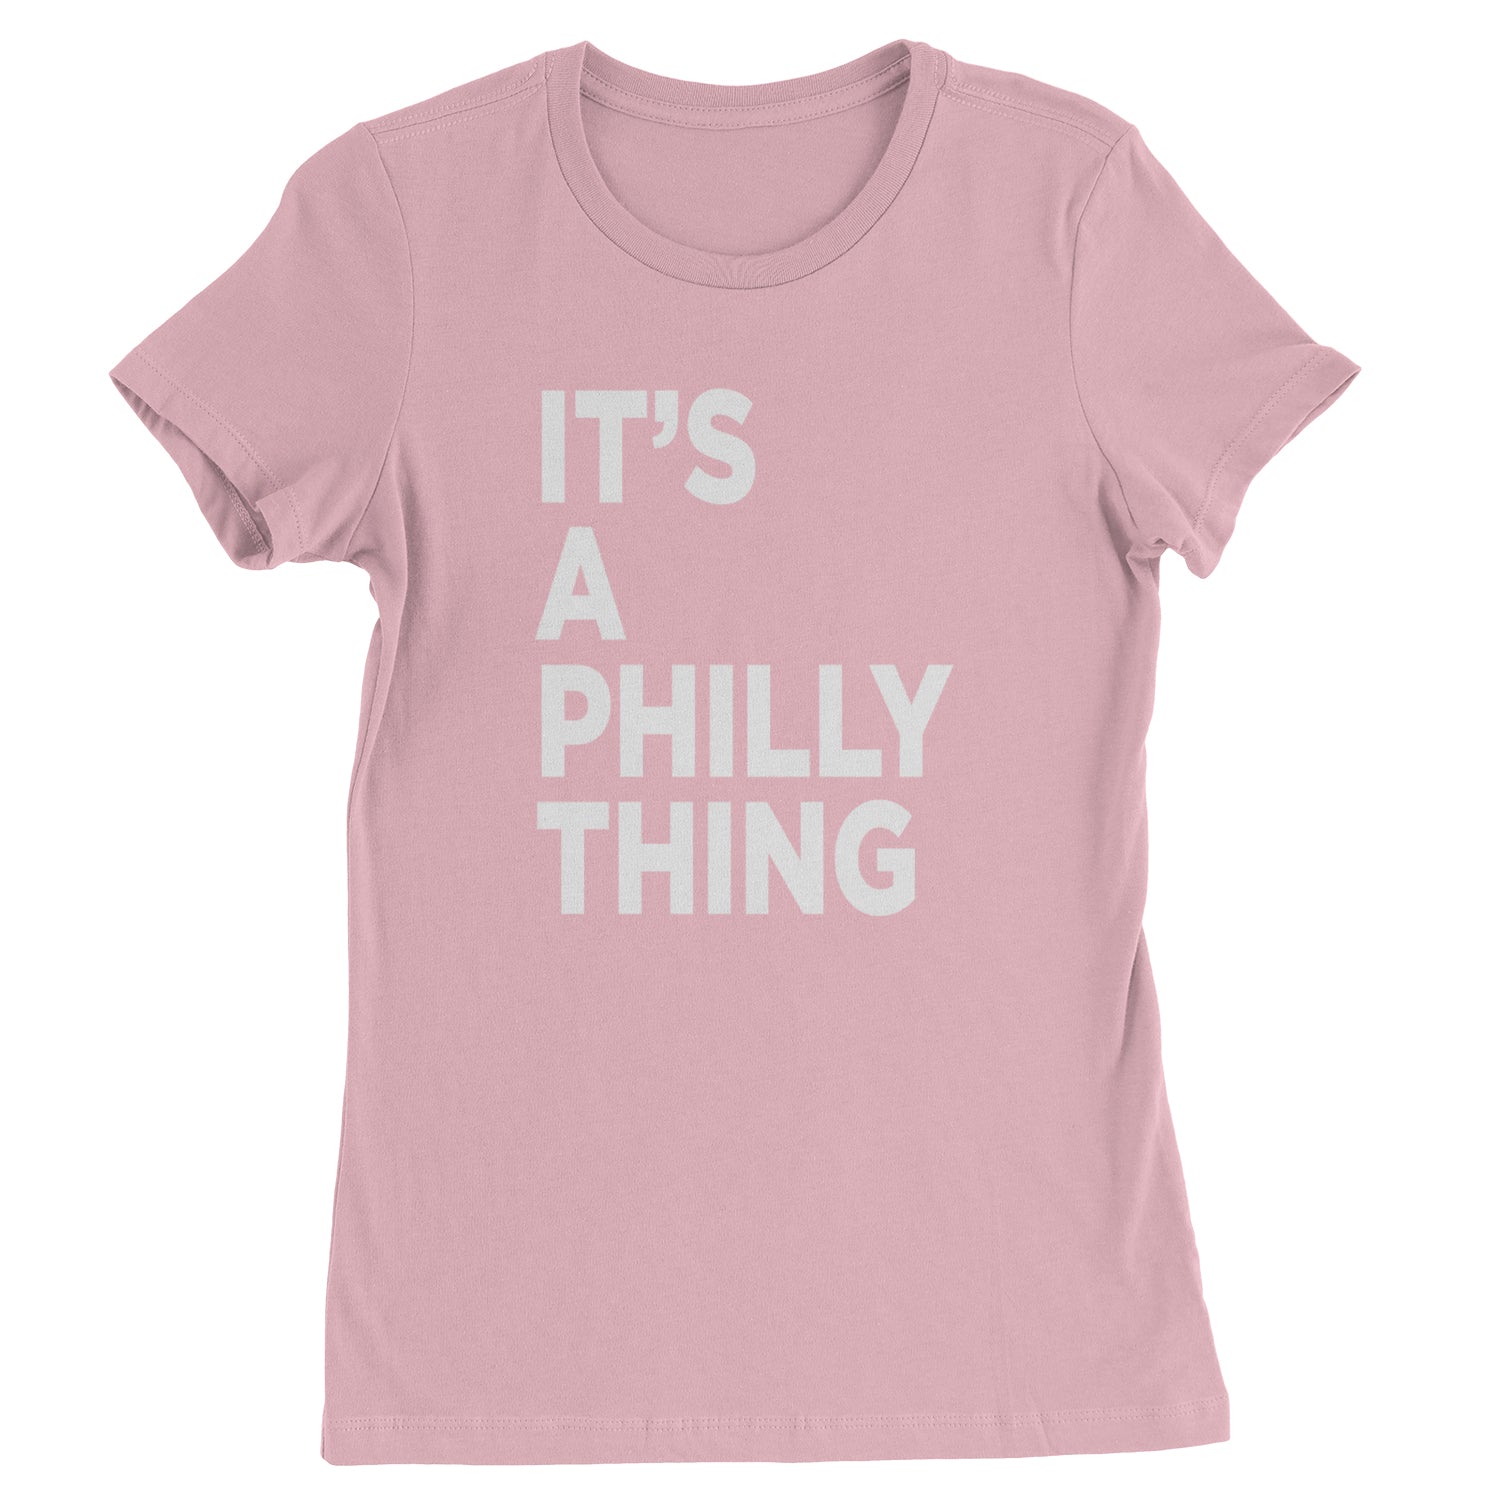 PHILLY It's A Philly Thing Womens T-shirt baseball, dilly, filly, football, jawn, morgan, Philadelphia, philli by Expression Tees